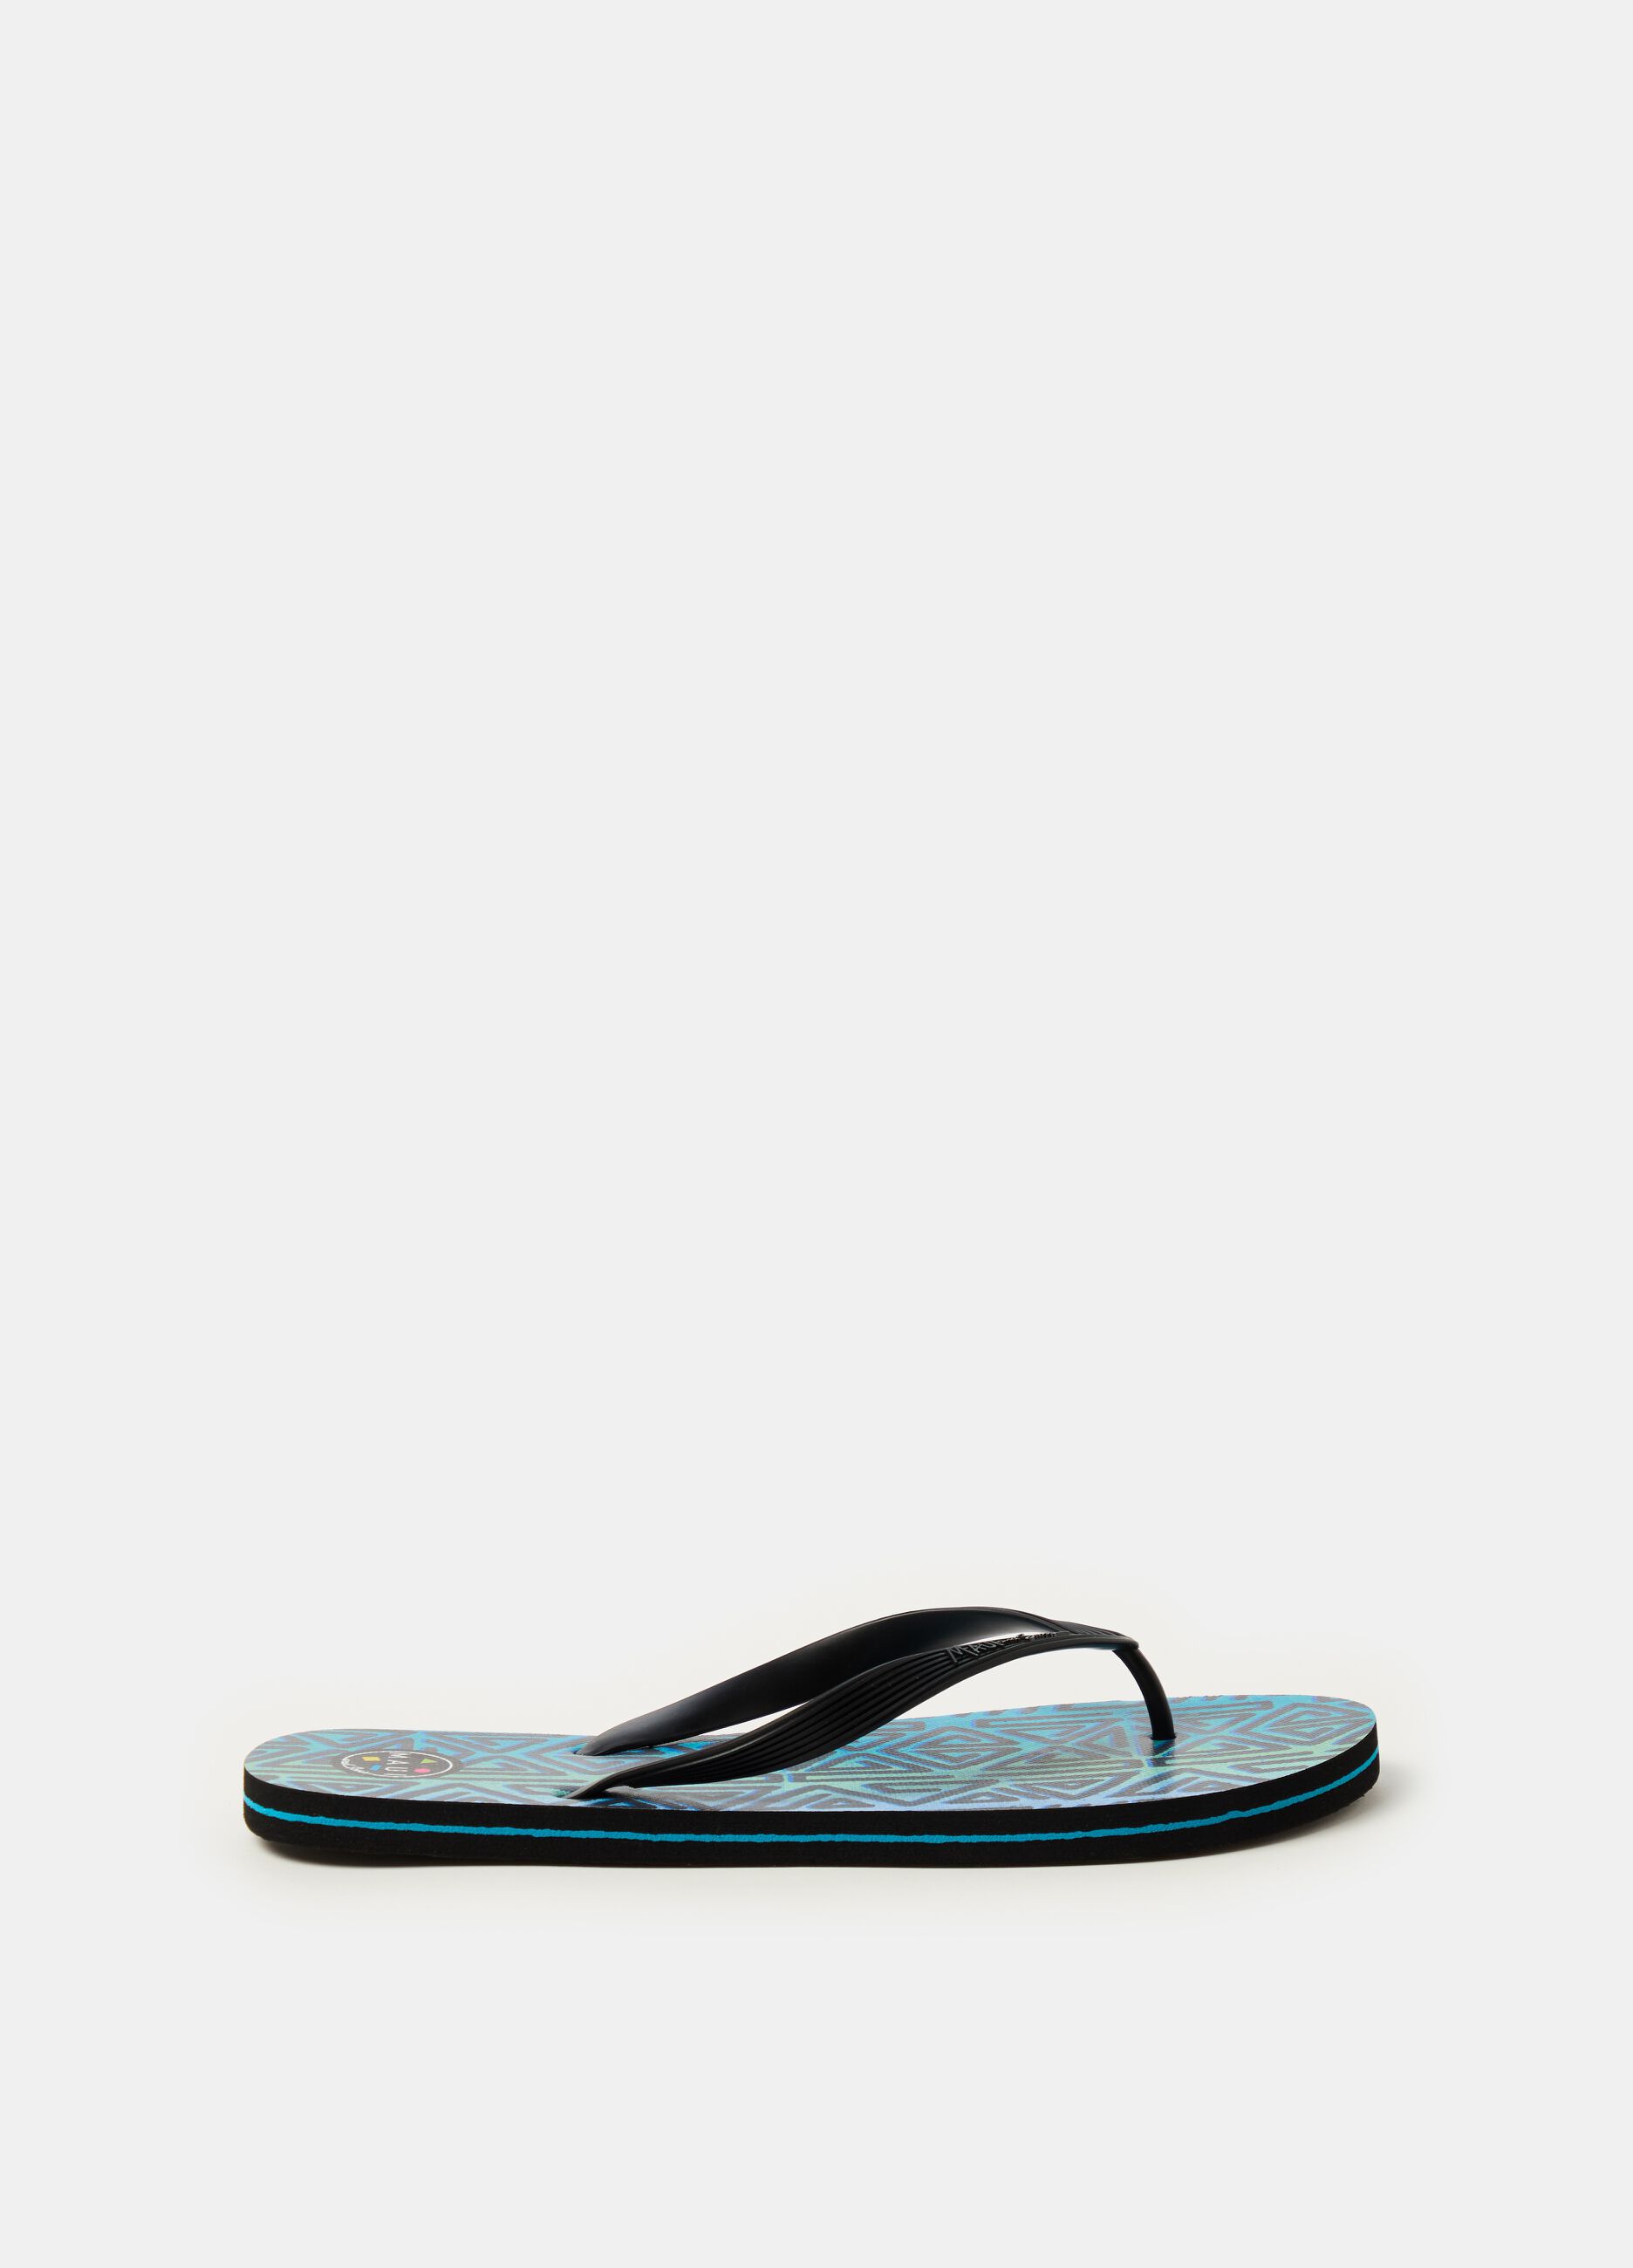 Thong sandals with geometric print